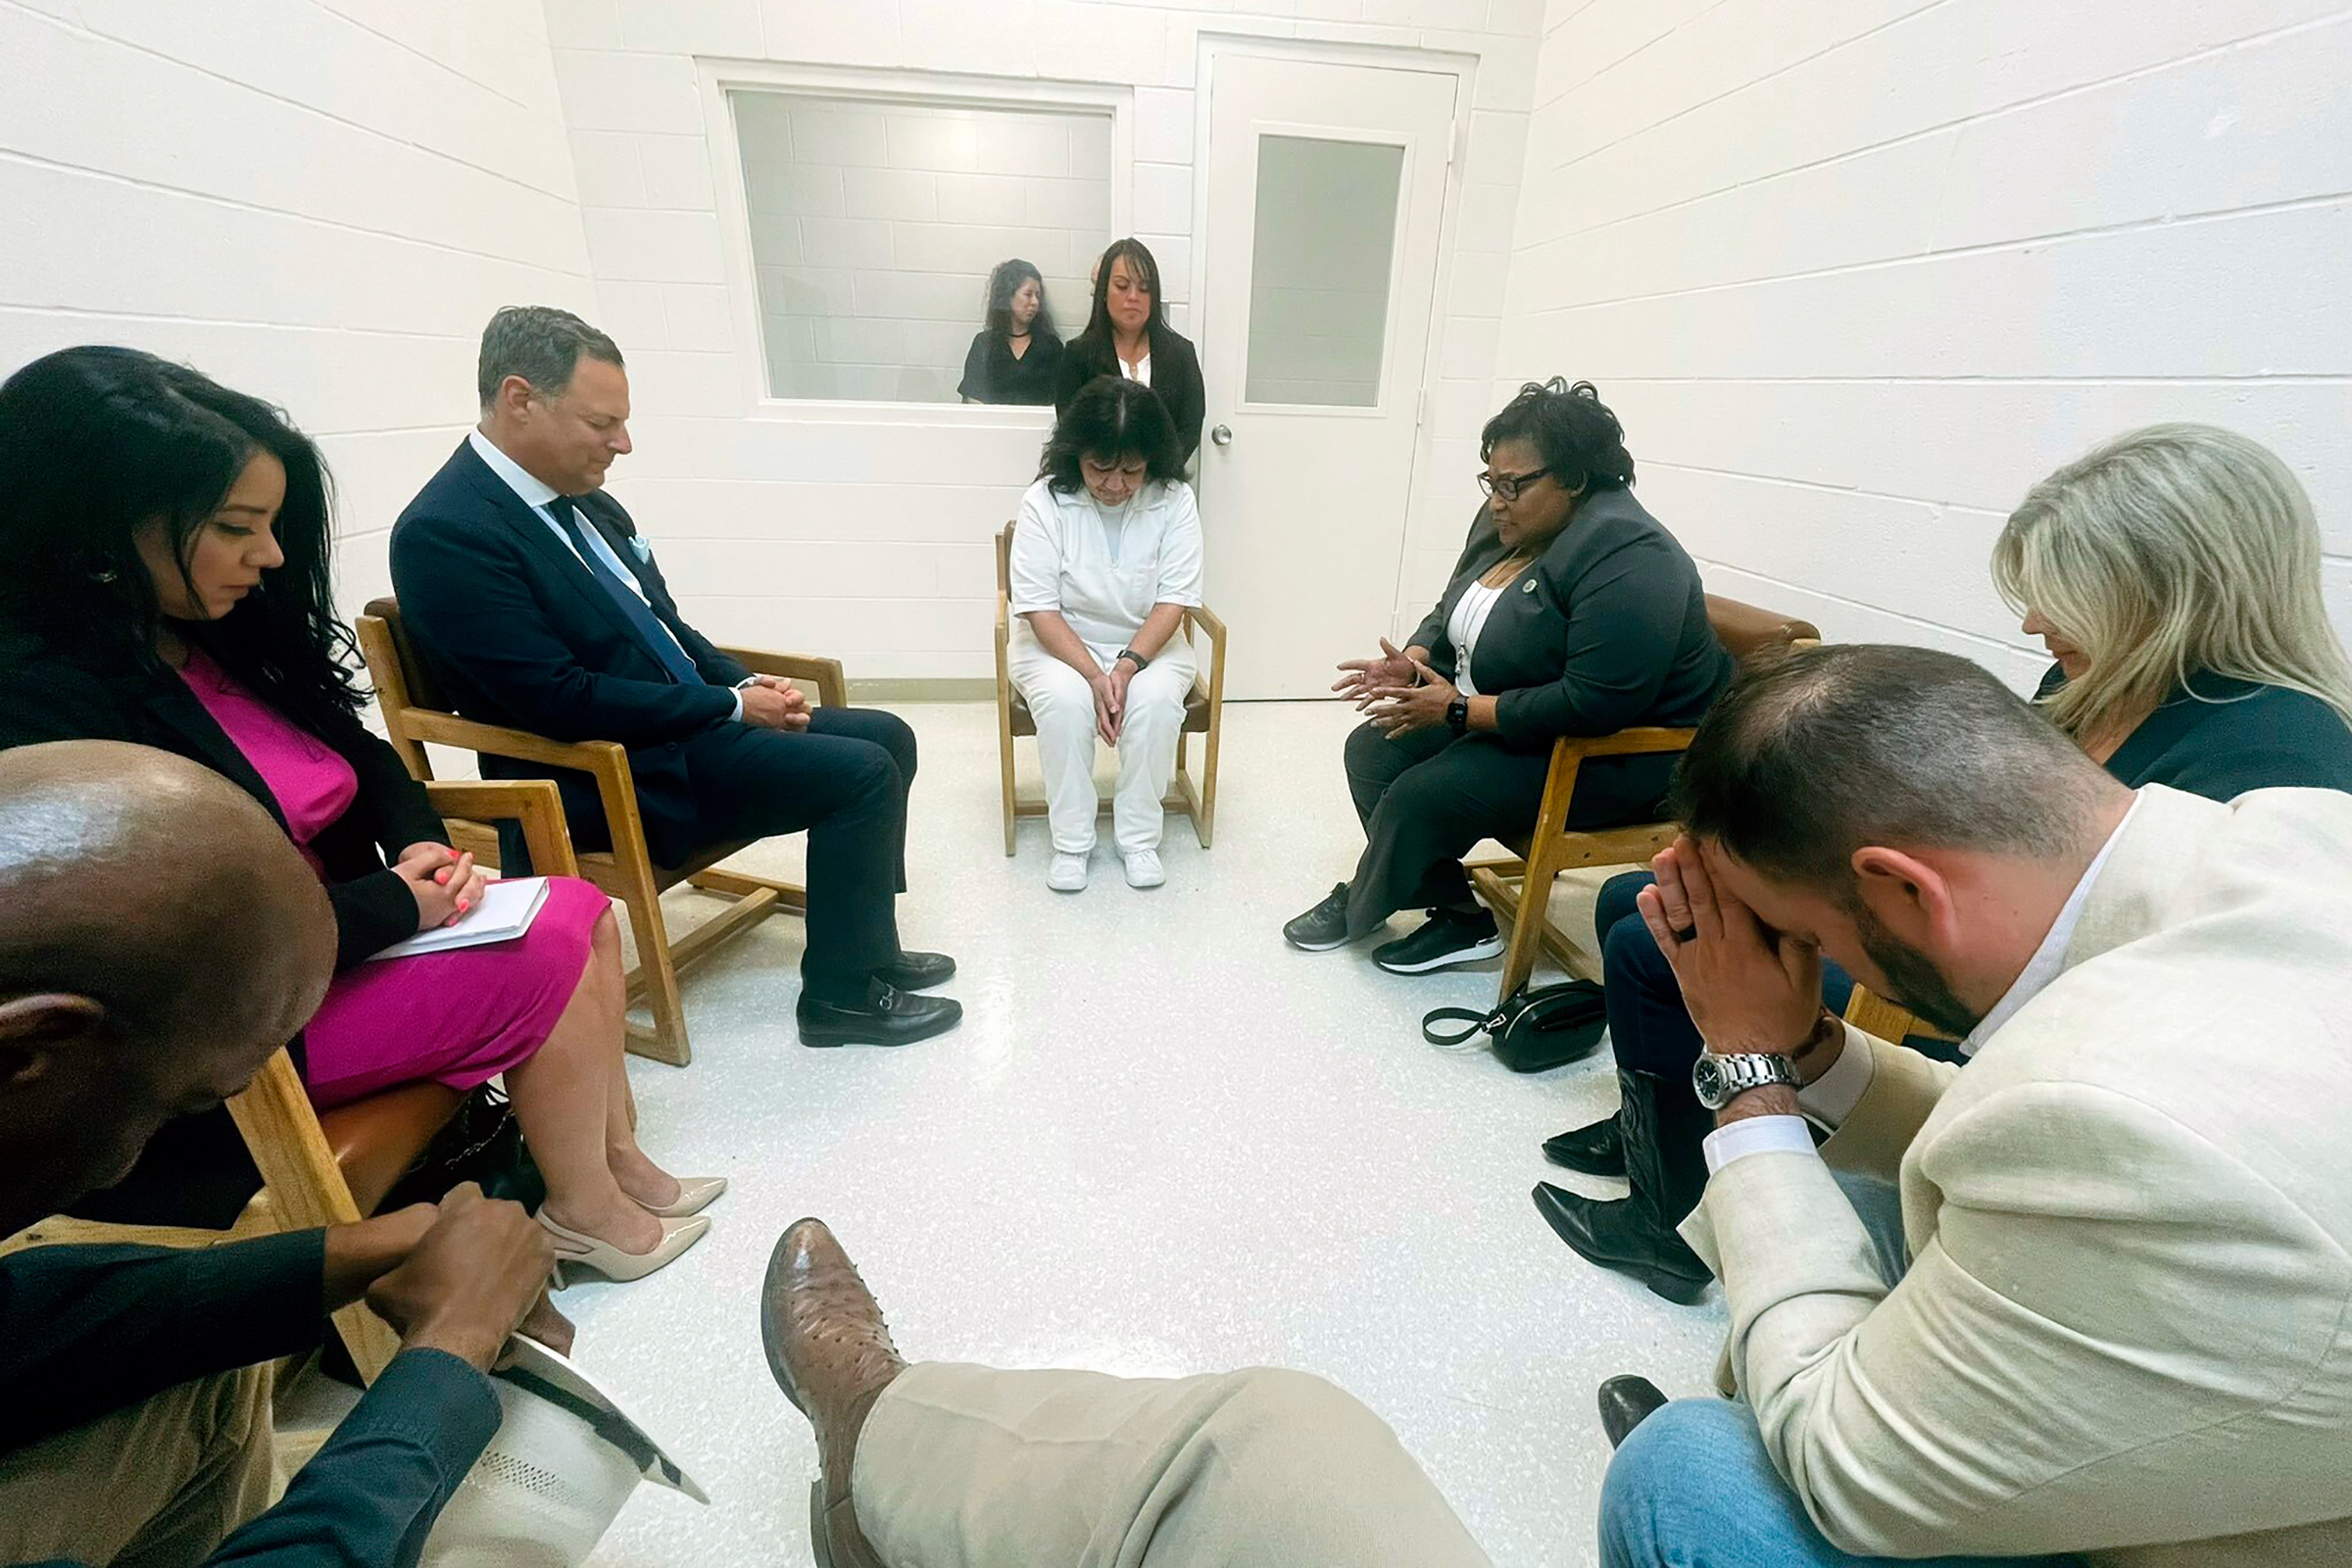 Melissa Lucio, center, leads a group of seven Texas lawmakers in prayer in a room at the Mountain View Unit in Gatesville, Texas, on April 6, 2022. (Texas state Rep. Jeff Leach/AP)